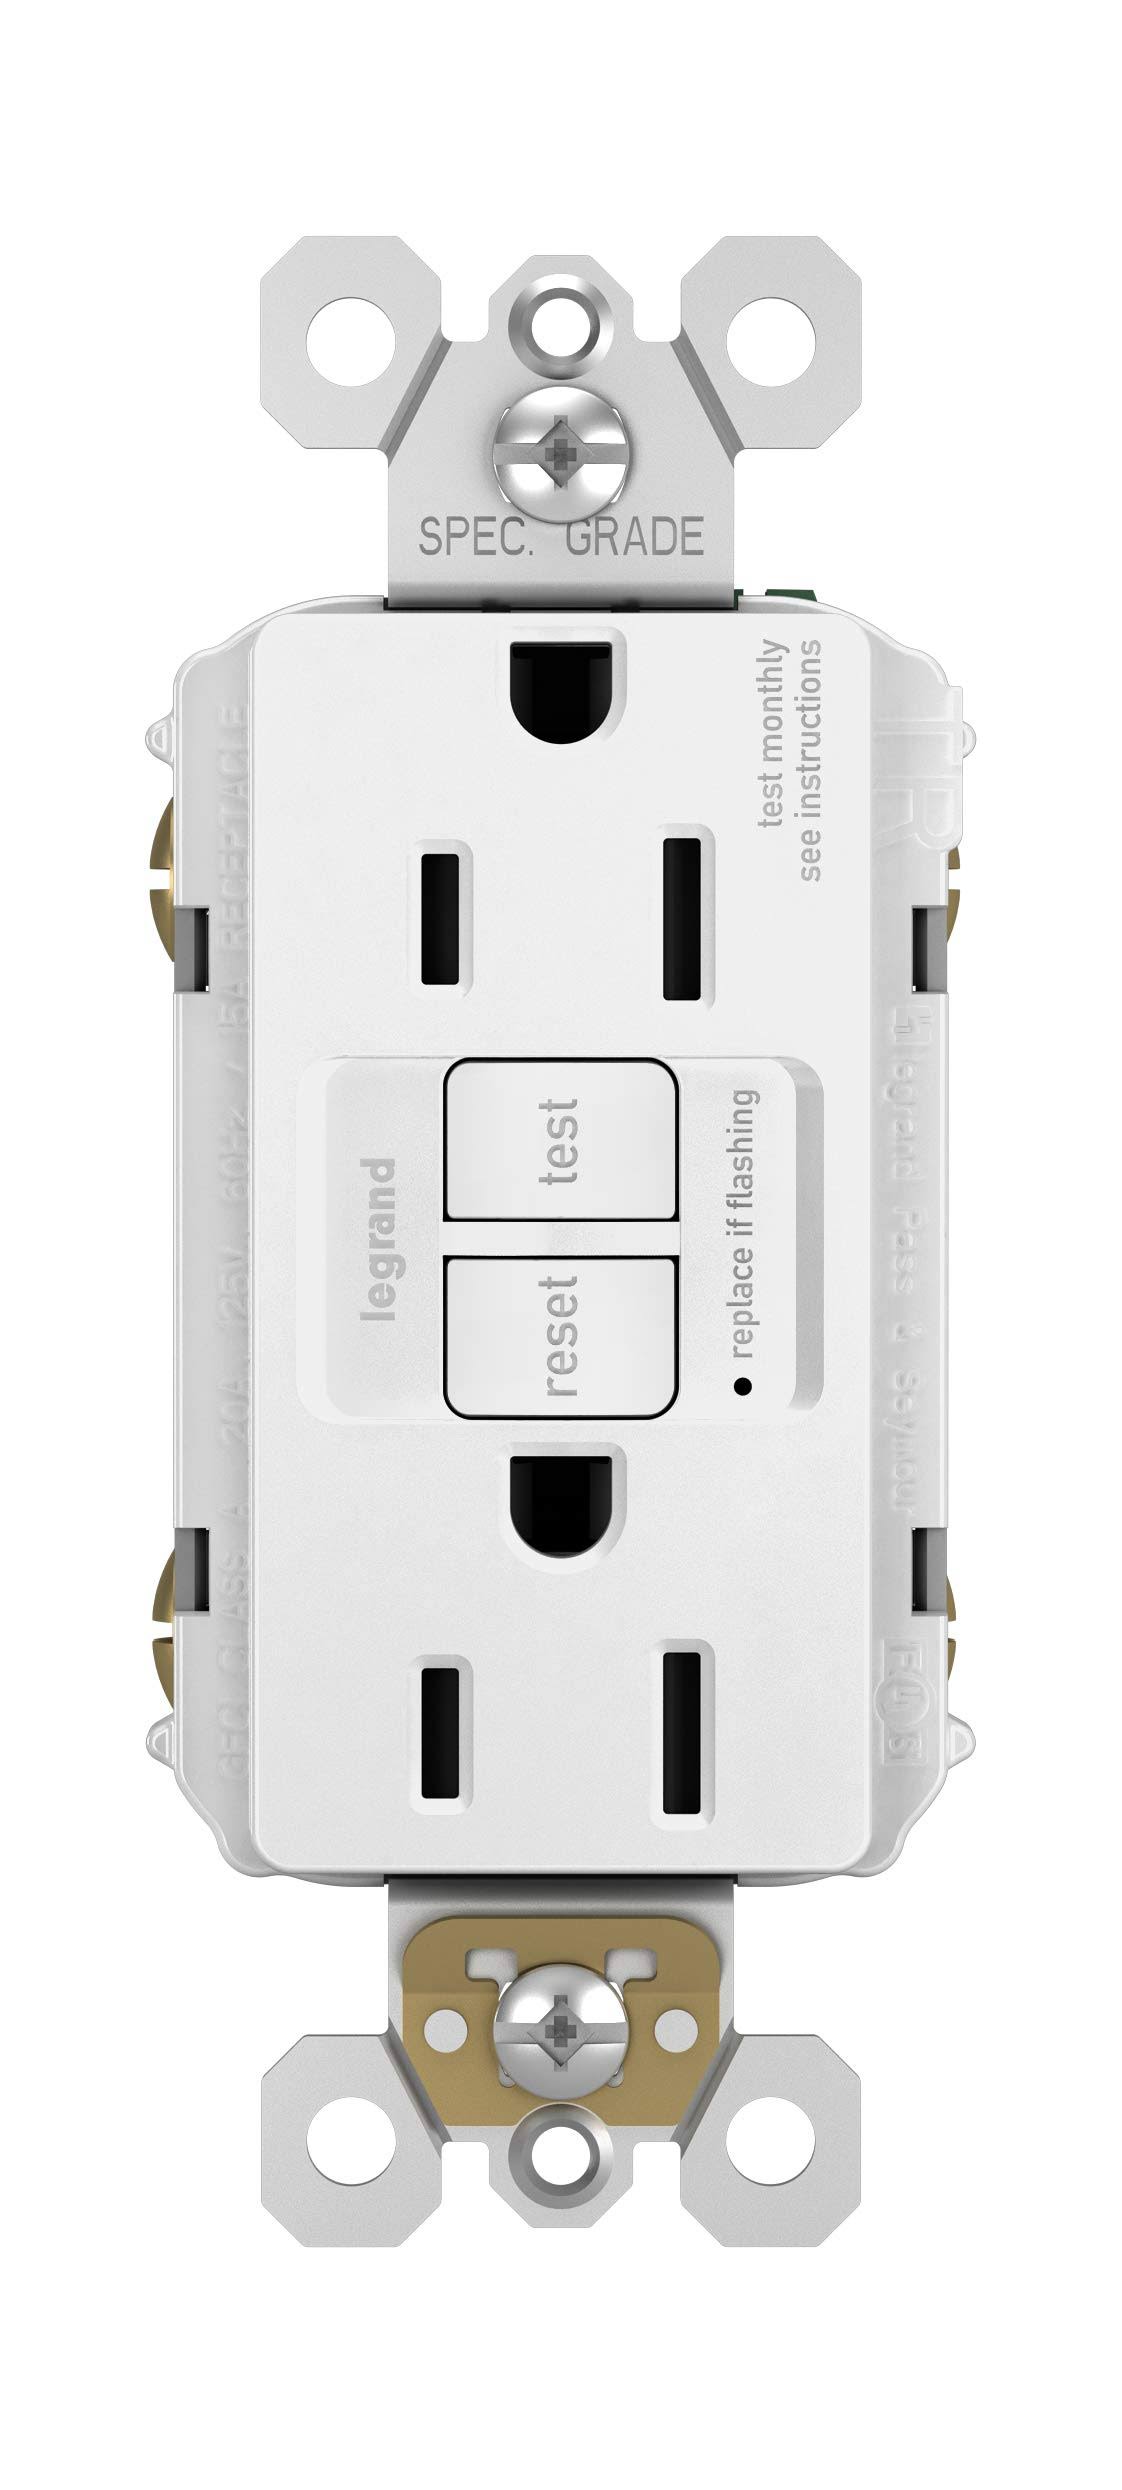 Legrand Electrical Outlet 1597TRWCCD12 15-Amp 125-Volt White Indoor GFCI Decorator Wall Tamper Resistant Outlet - Lowe's